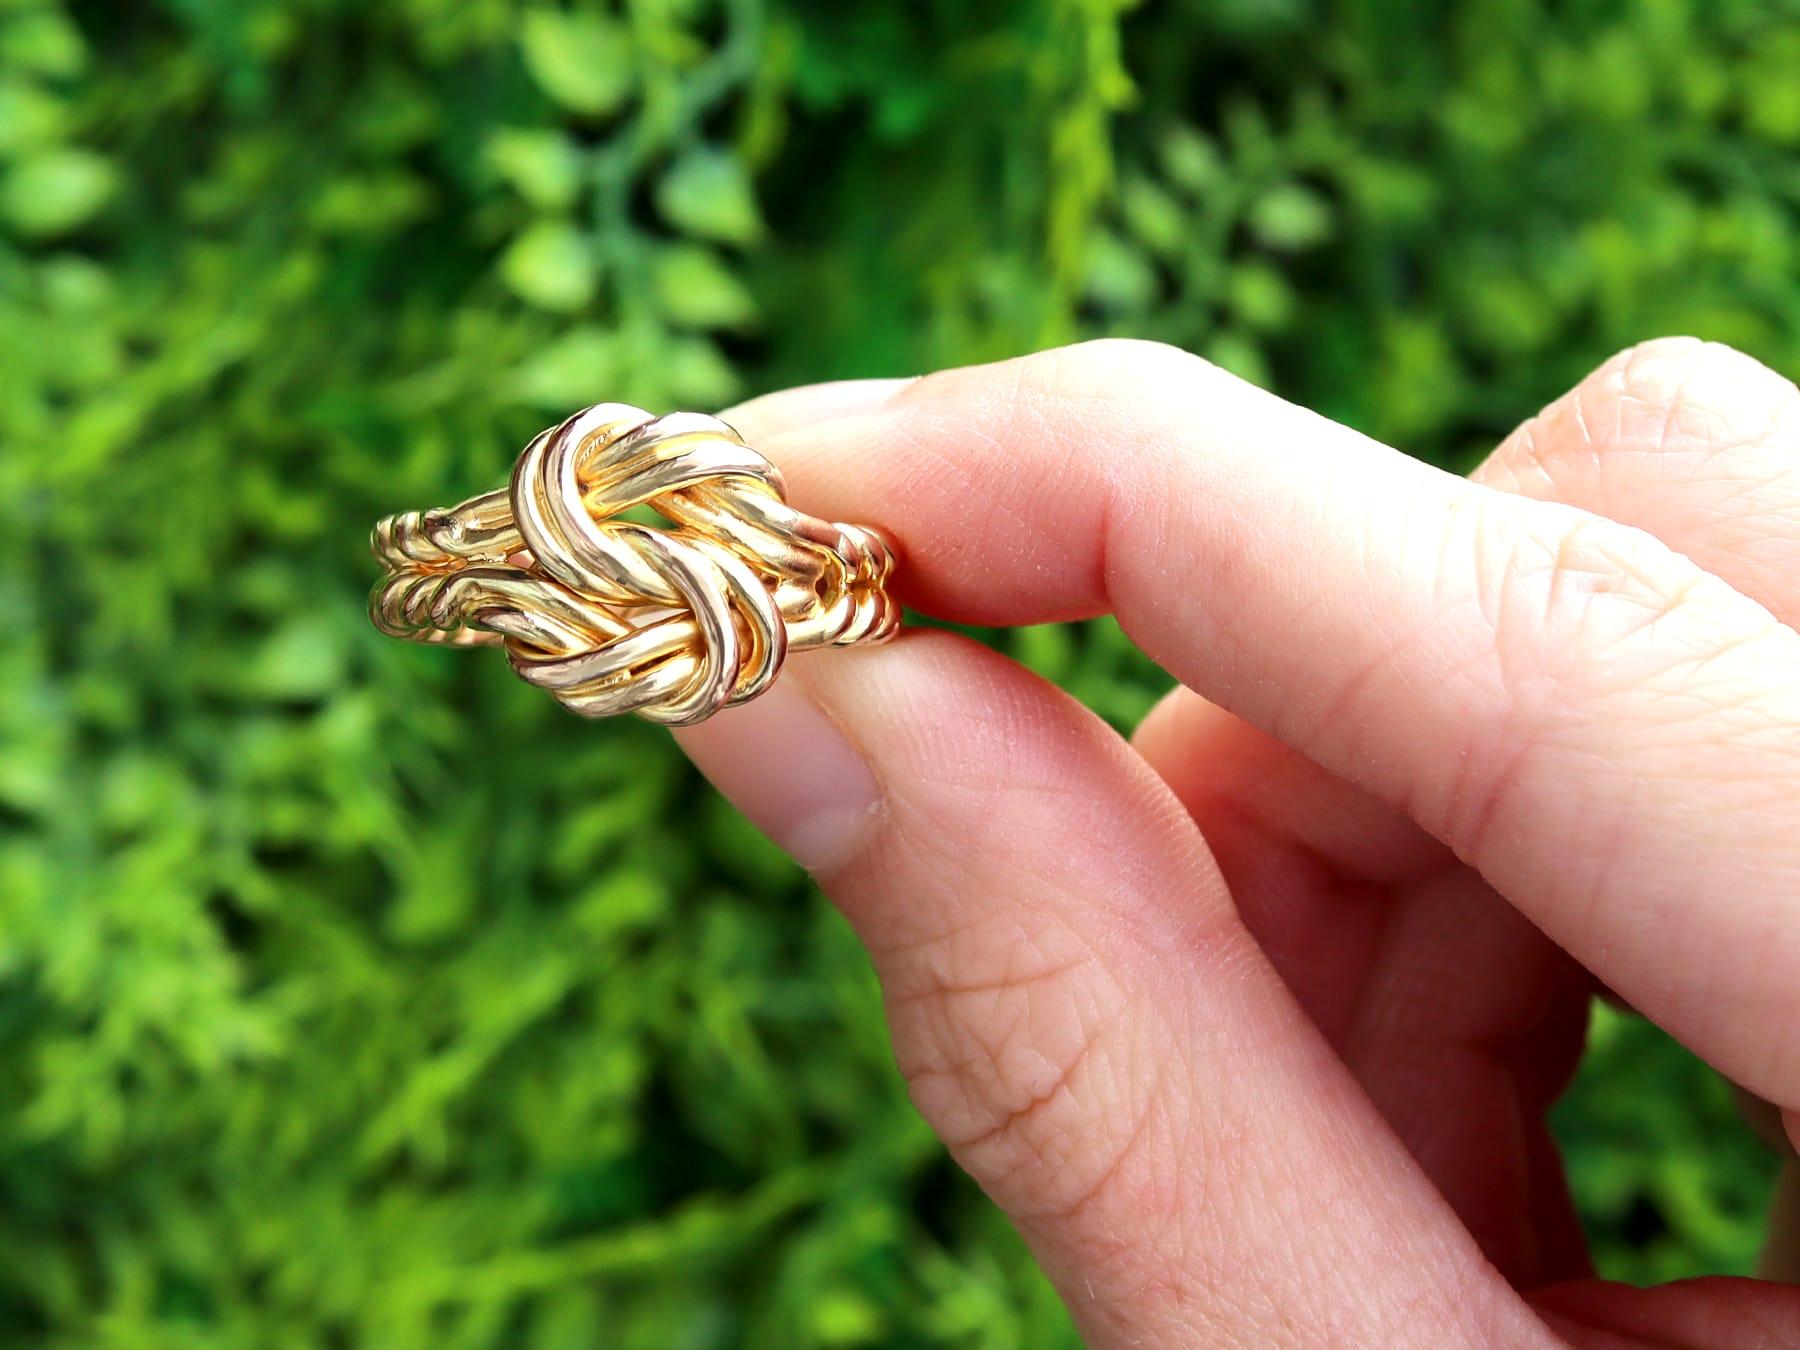 An exceptional, fine and impressive antique Victorian 18k yellow gold knot ring; part of our diverse collection of antique gold rings

This exceptional, fine and impressive antique ring has been crafted in 18k yellow gold.

The anterior face is